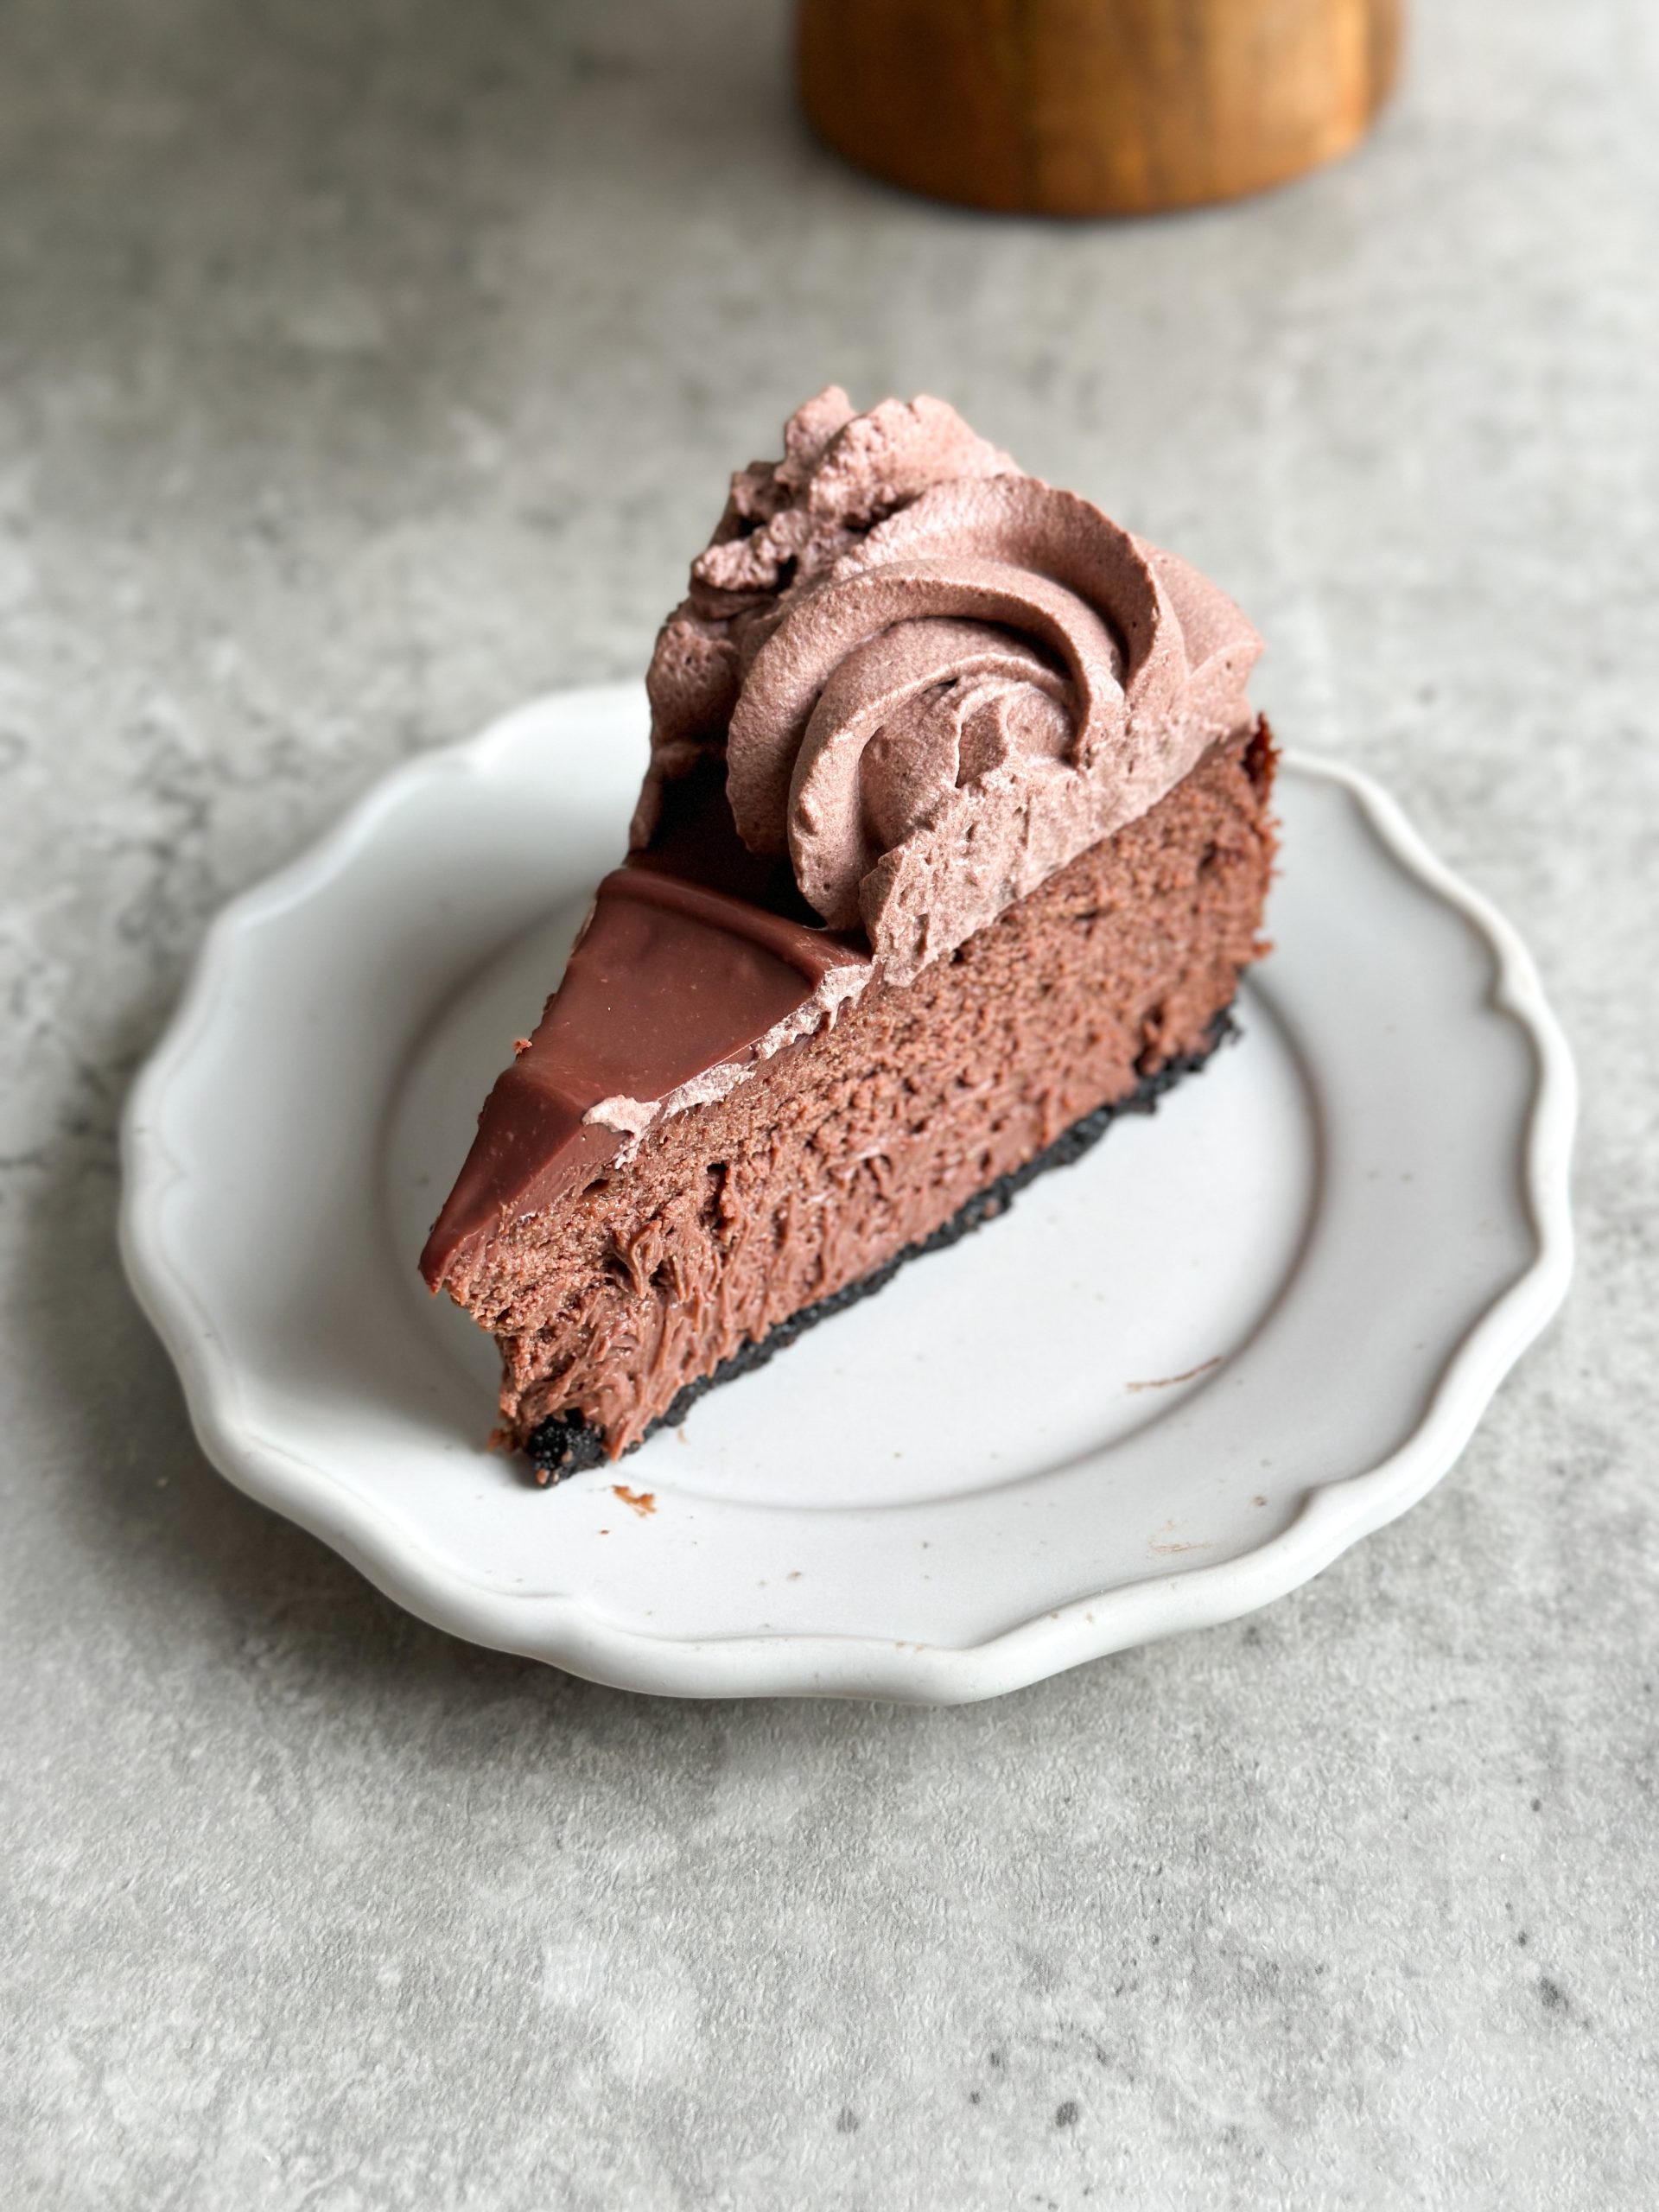 slice of chocolate cheesecake with creamy texture inside and ganache on top